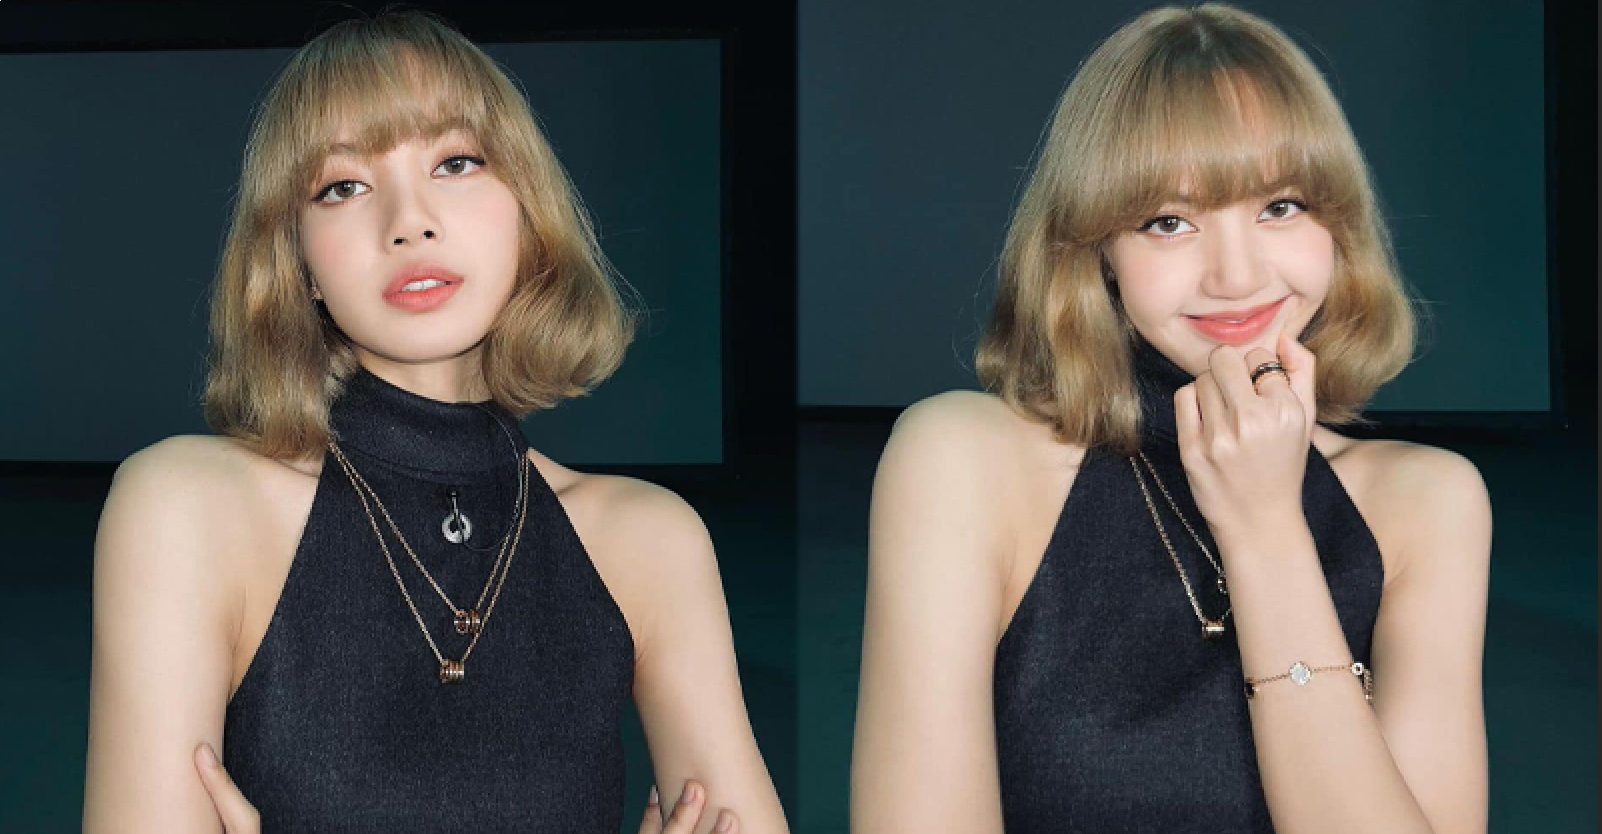 "Where is LISA SOLO?" - BLINKs Are Looking For Lisa's Solo Project Than Ever!